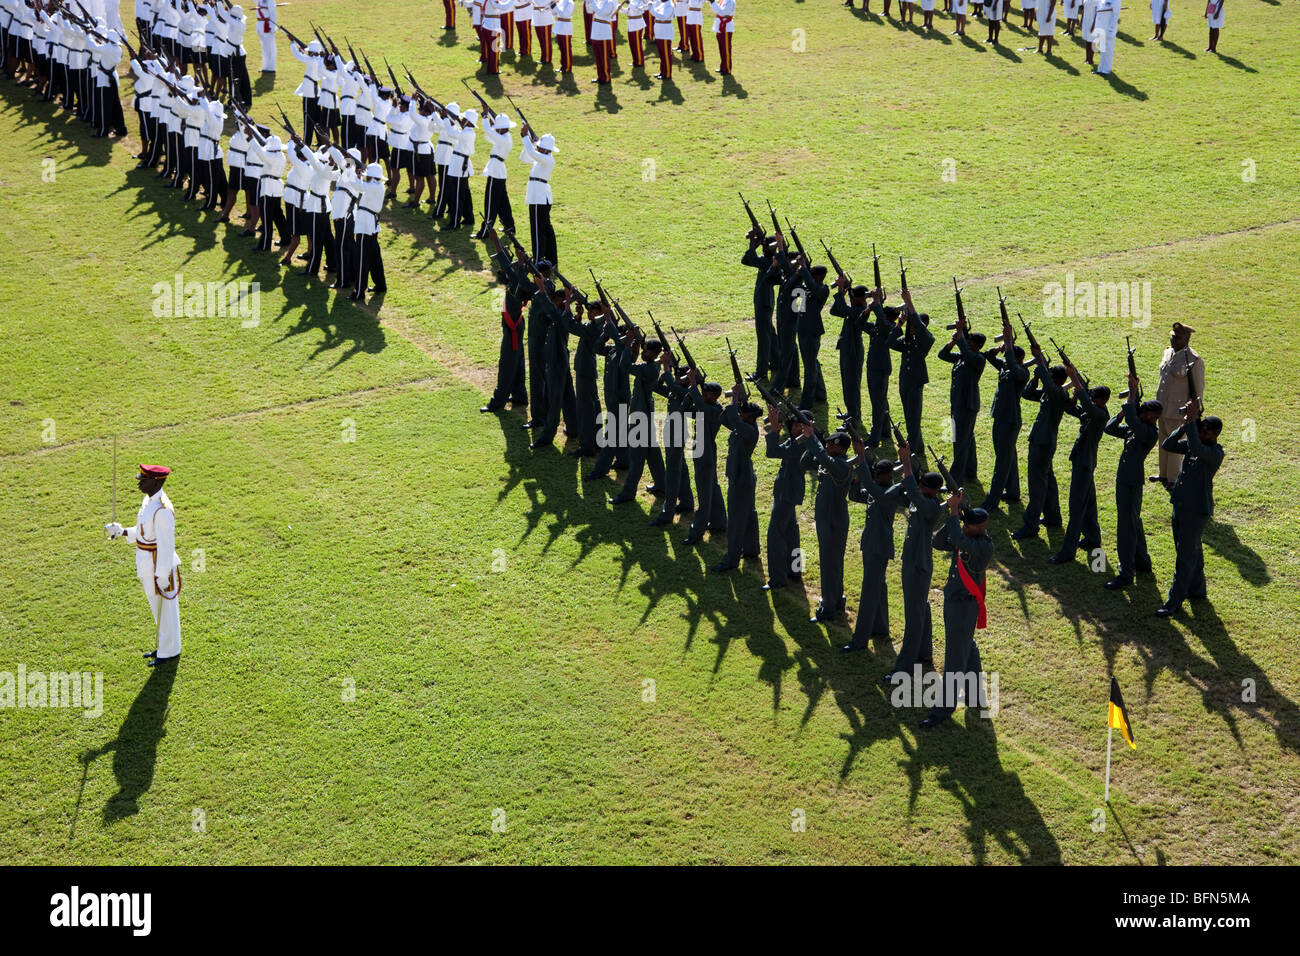 Gun salute from the army and police on Independence Day celebrations, St  Johns, Antigua Stock Photo - Alamy